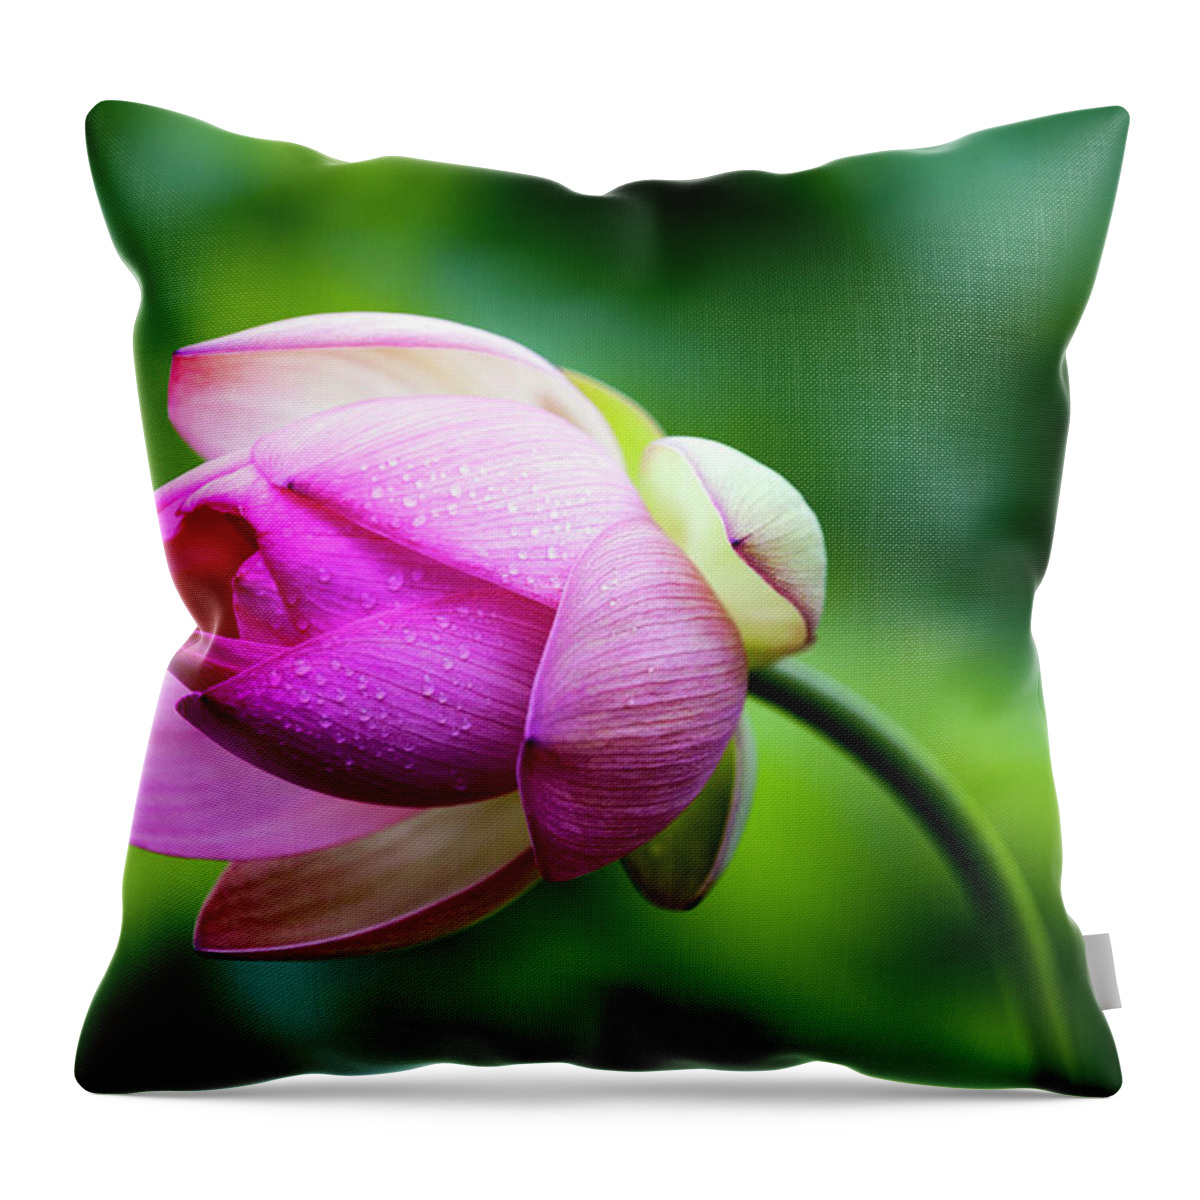 Lotus Throw Pillow featuring the photograph Droplets On Lotus by Edward Kreis